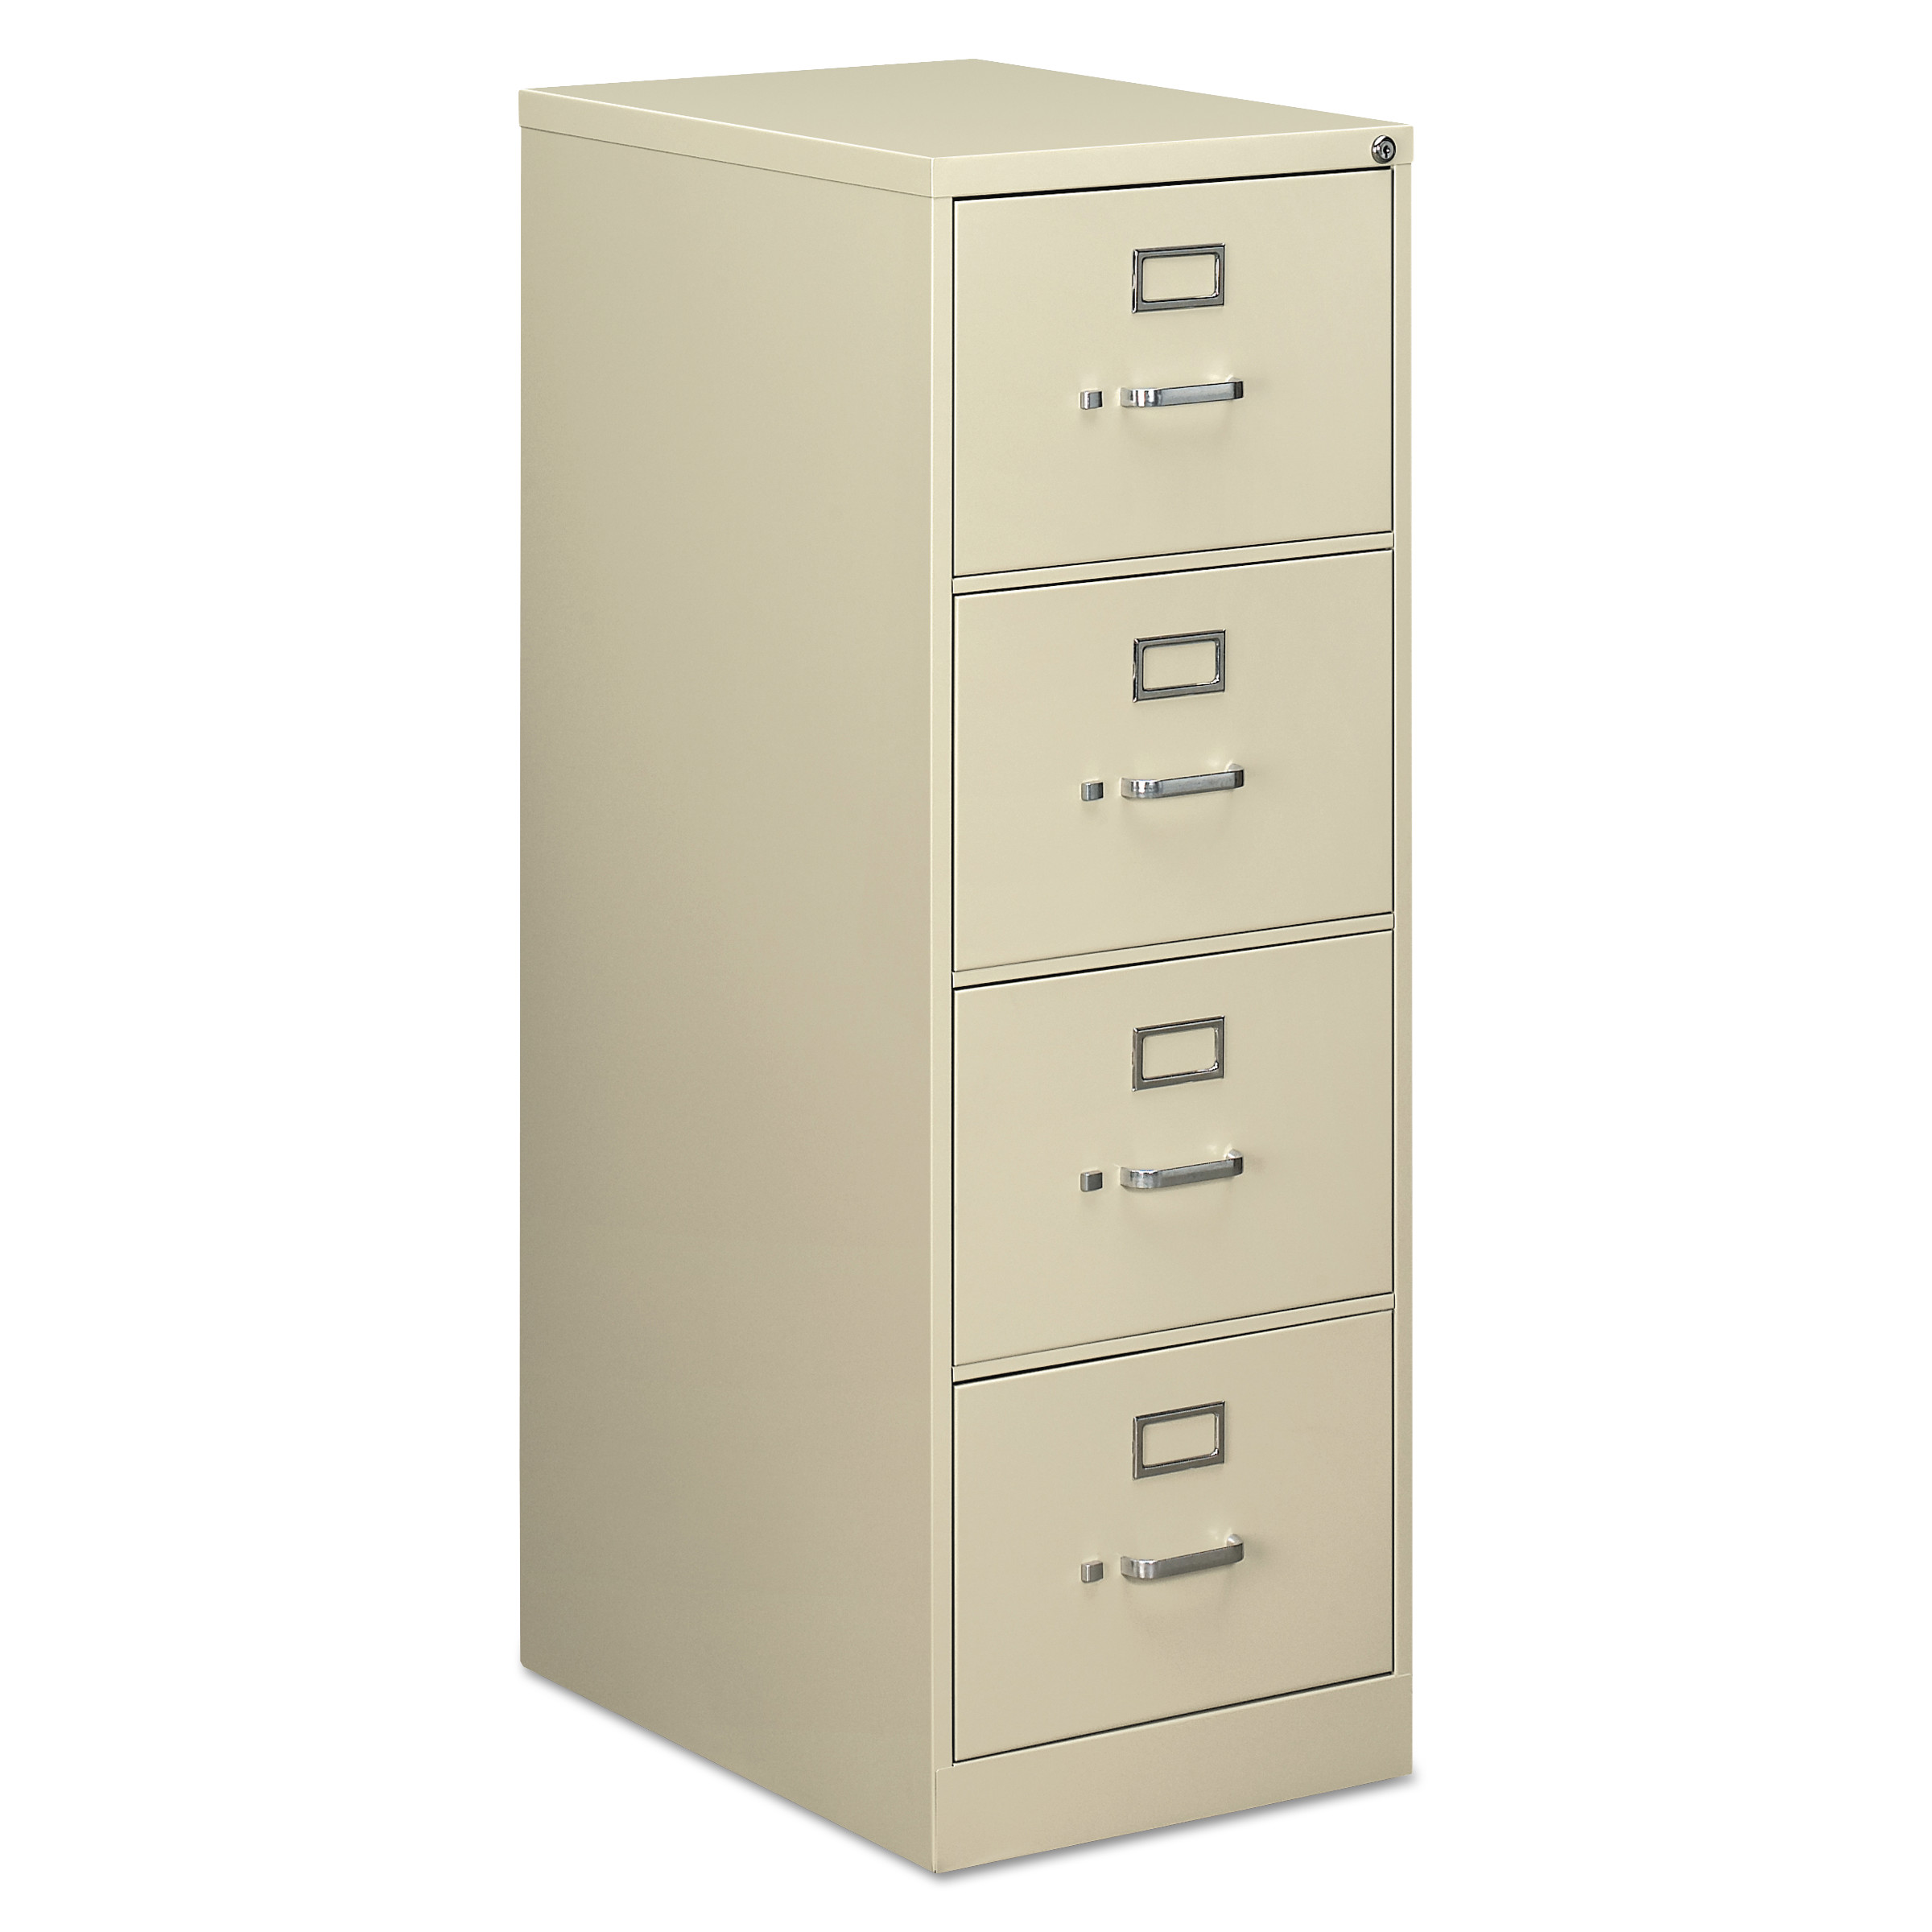 Four-Drawer Economy Vertical File Cabinet, Legal, 18 1/4w x 25d x 52h, Putty